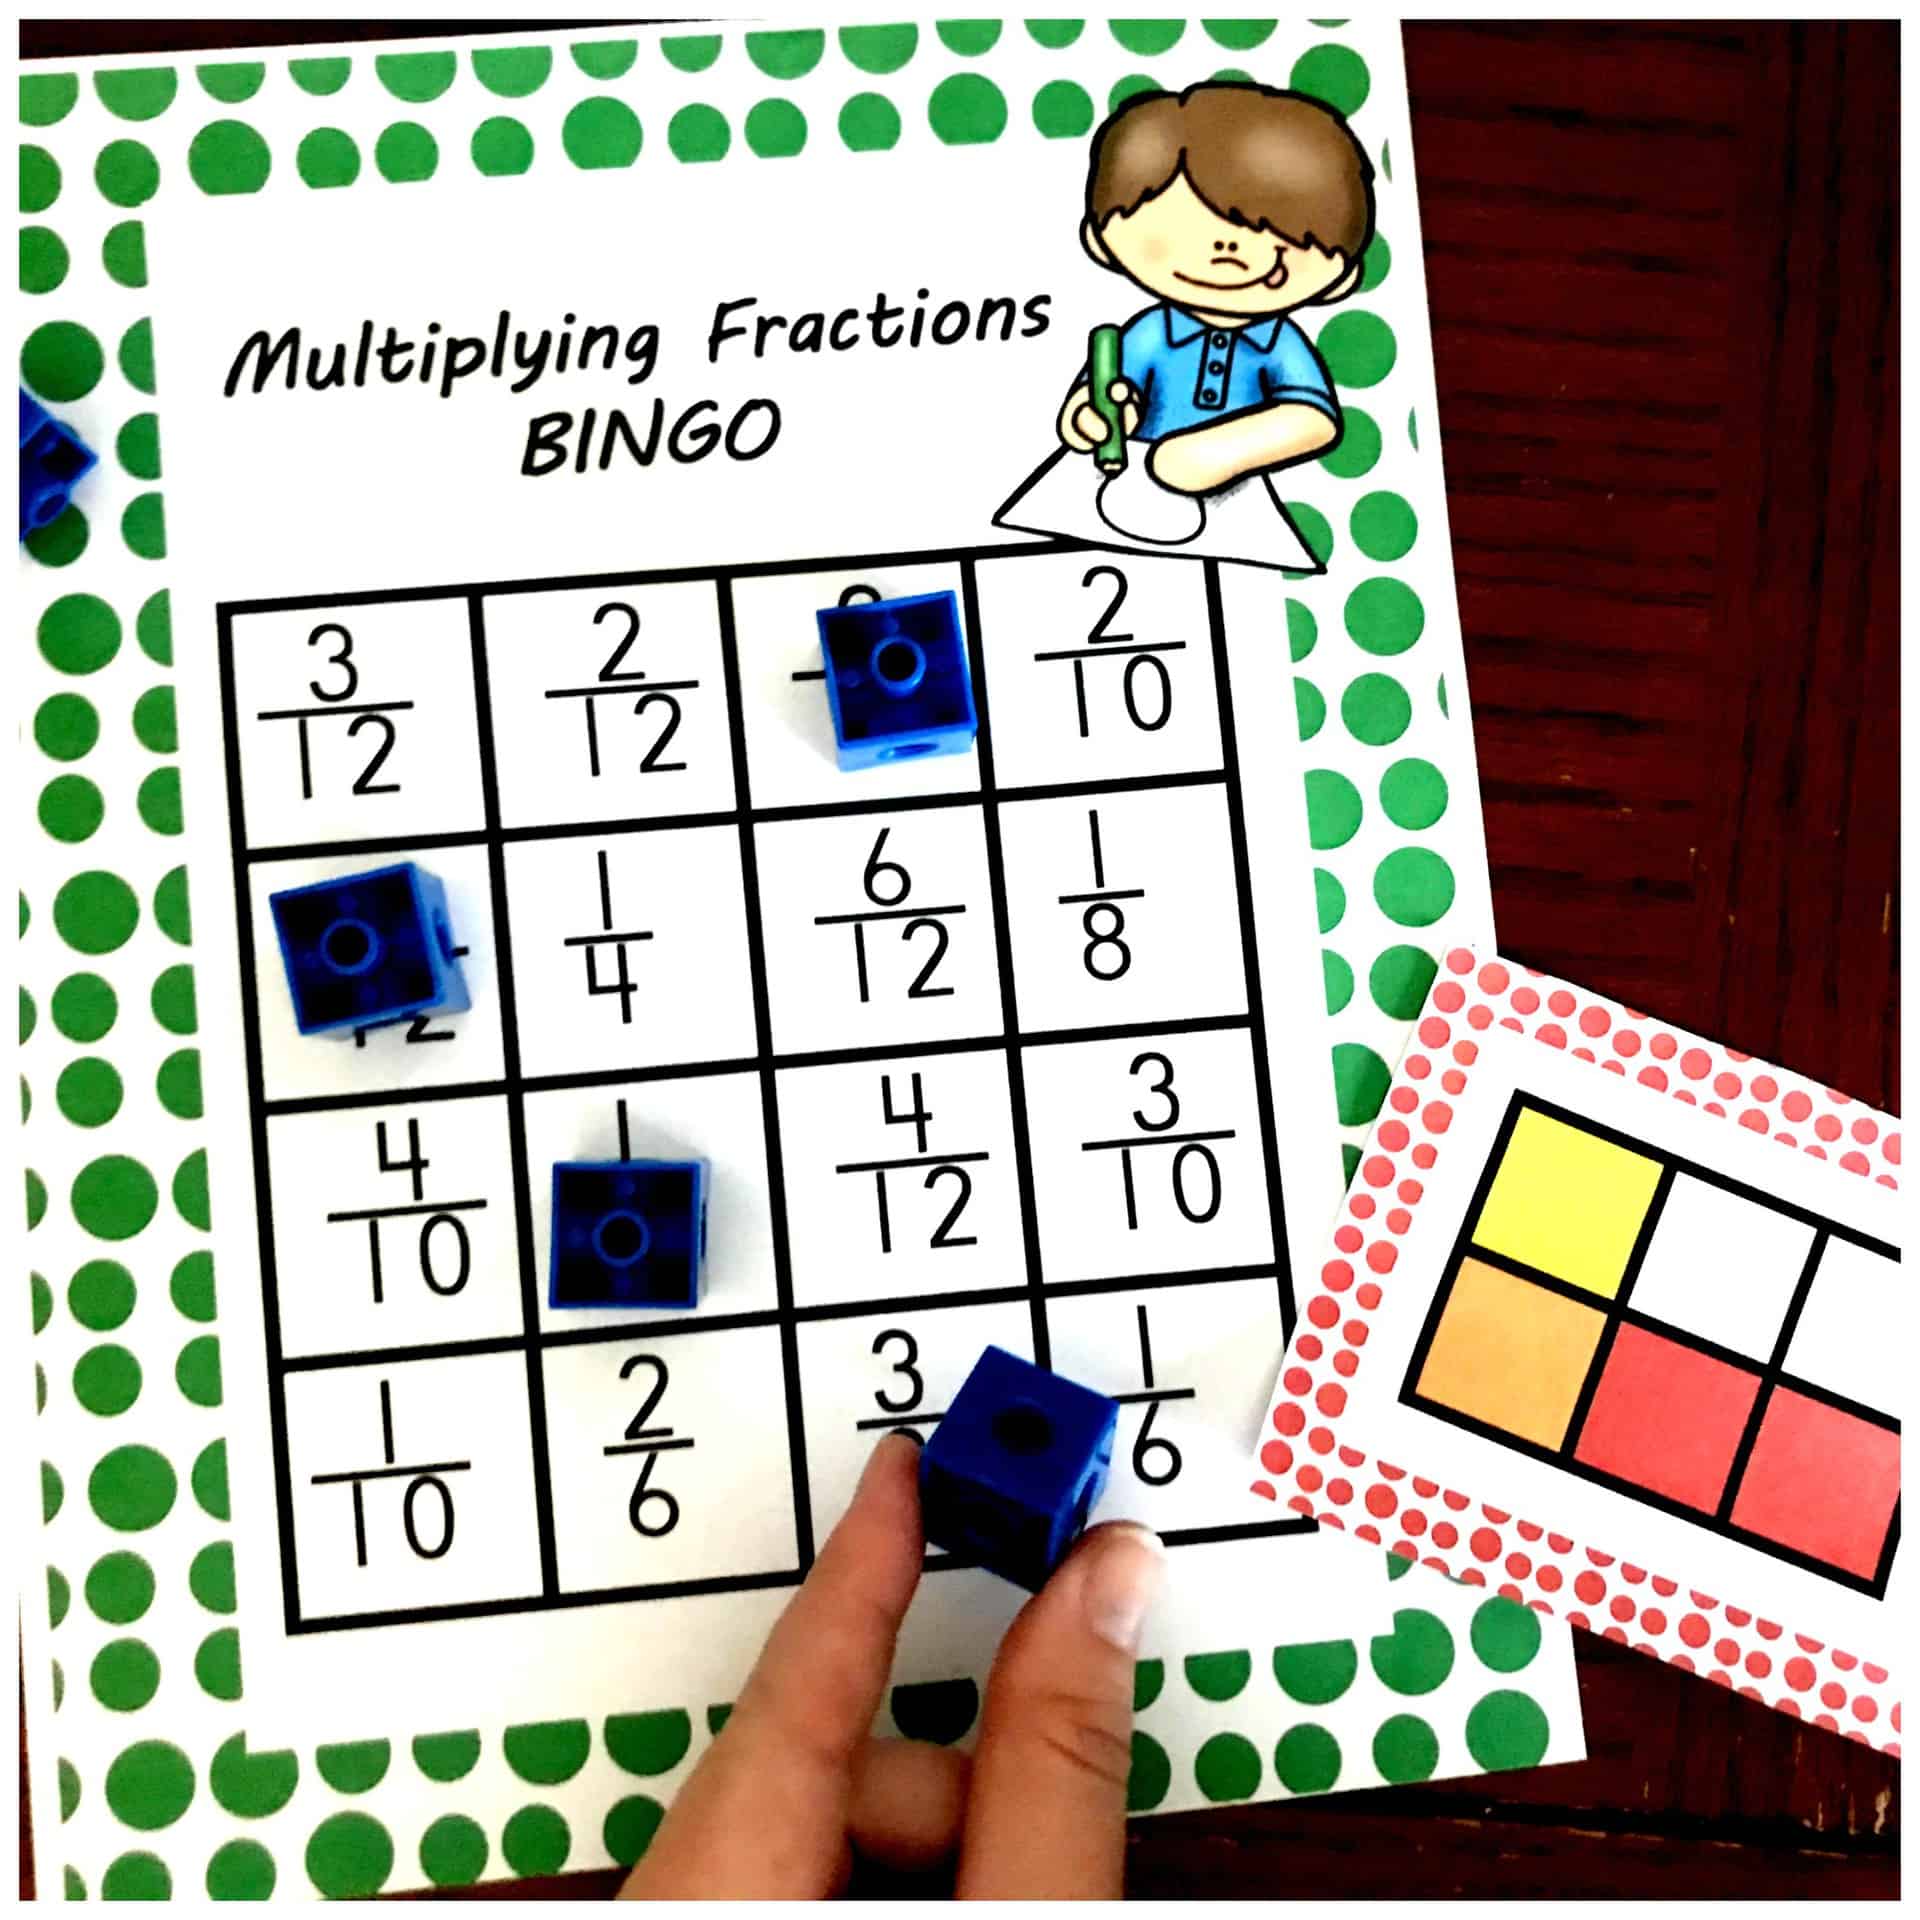 Here’s a Multiplying Fractions Game That’s Perfect for Extra Practice